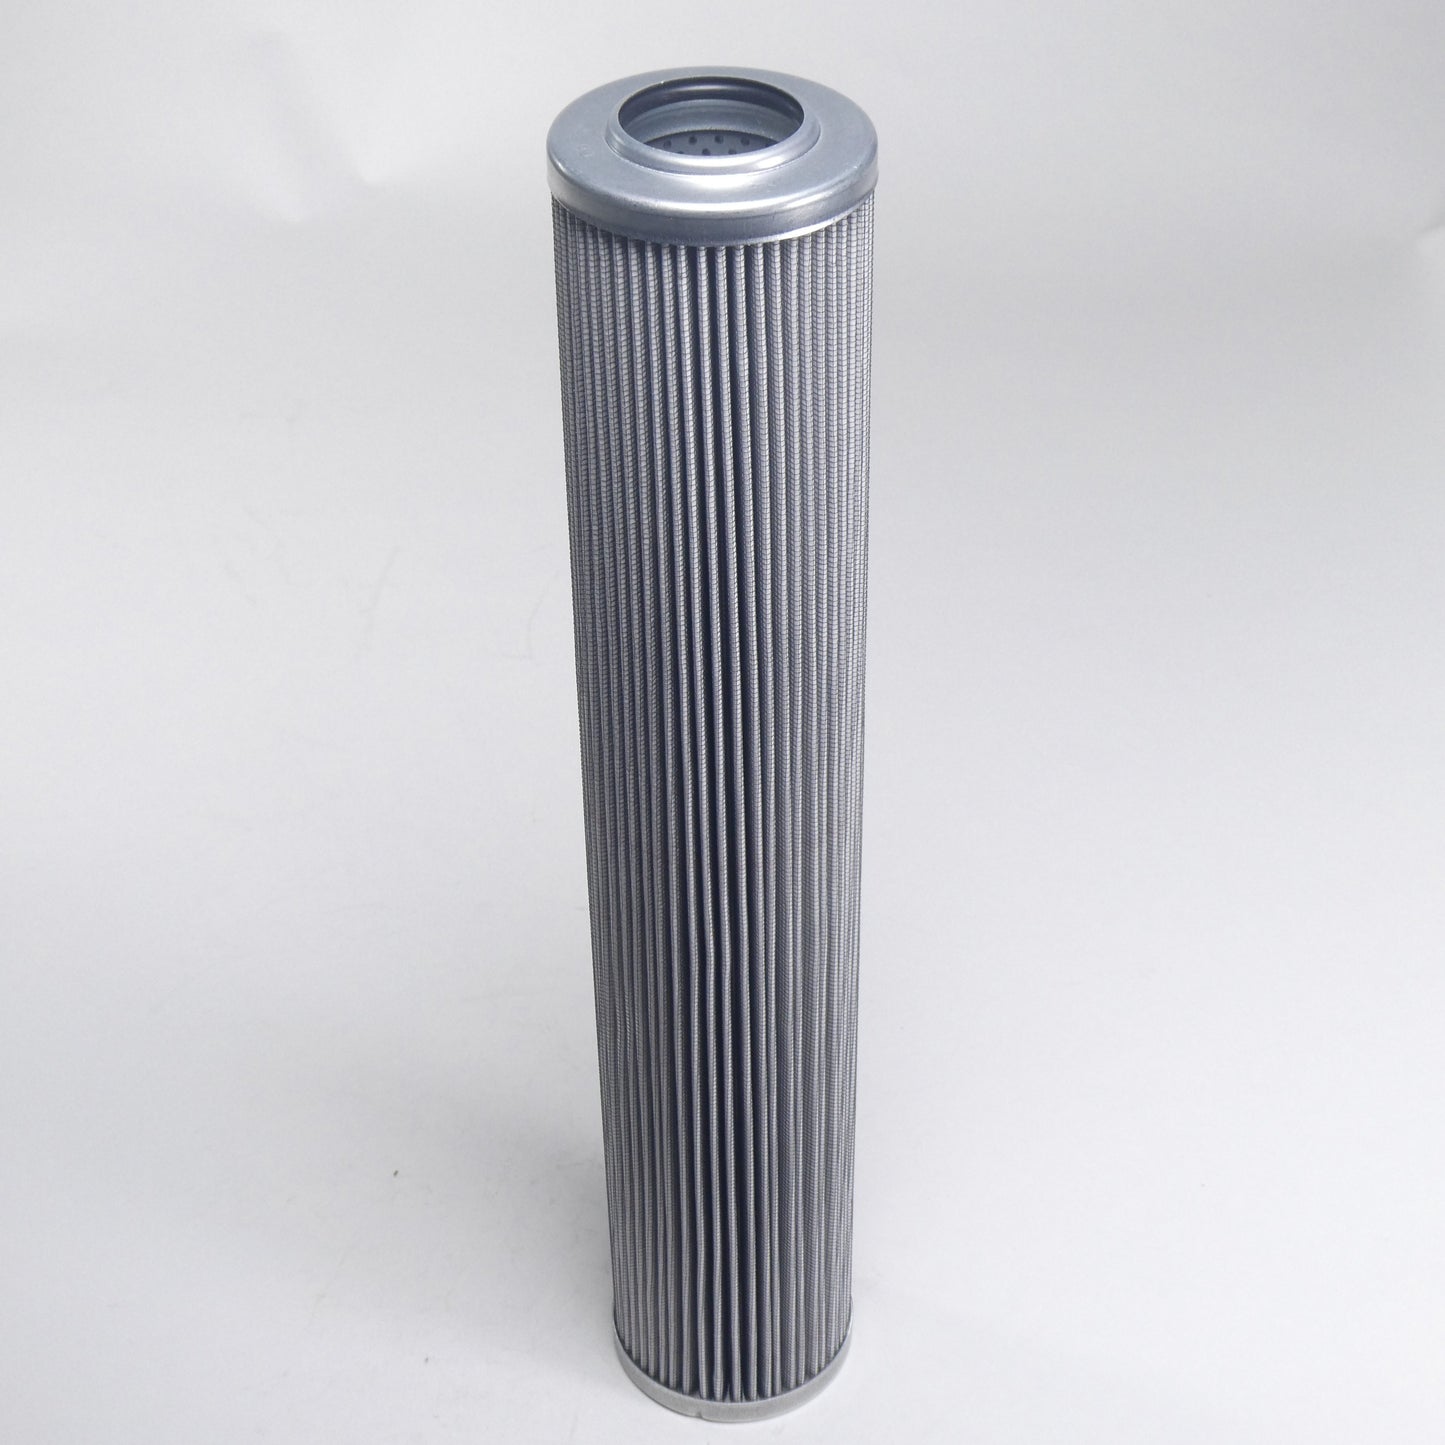 Hydrafil Replacement Filter Element for Hilco 3830-11-100-C